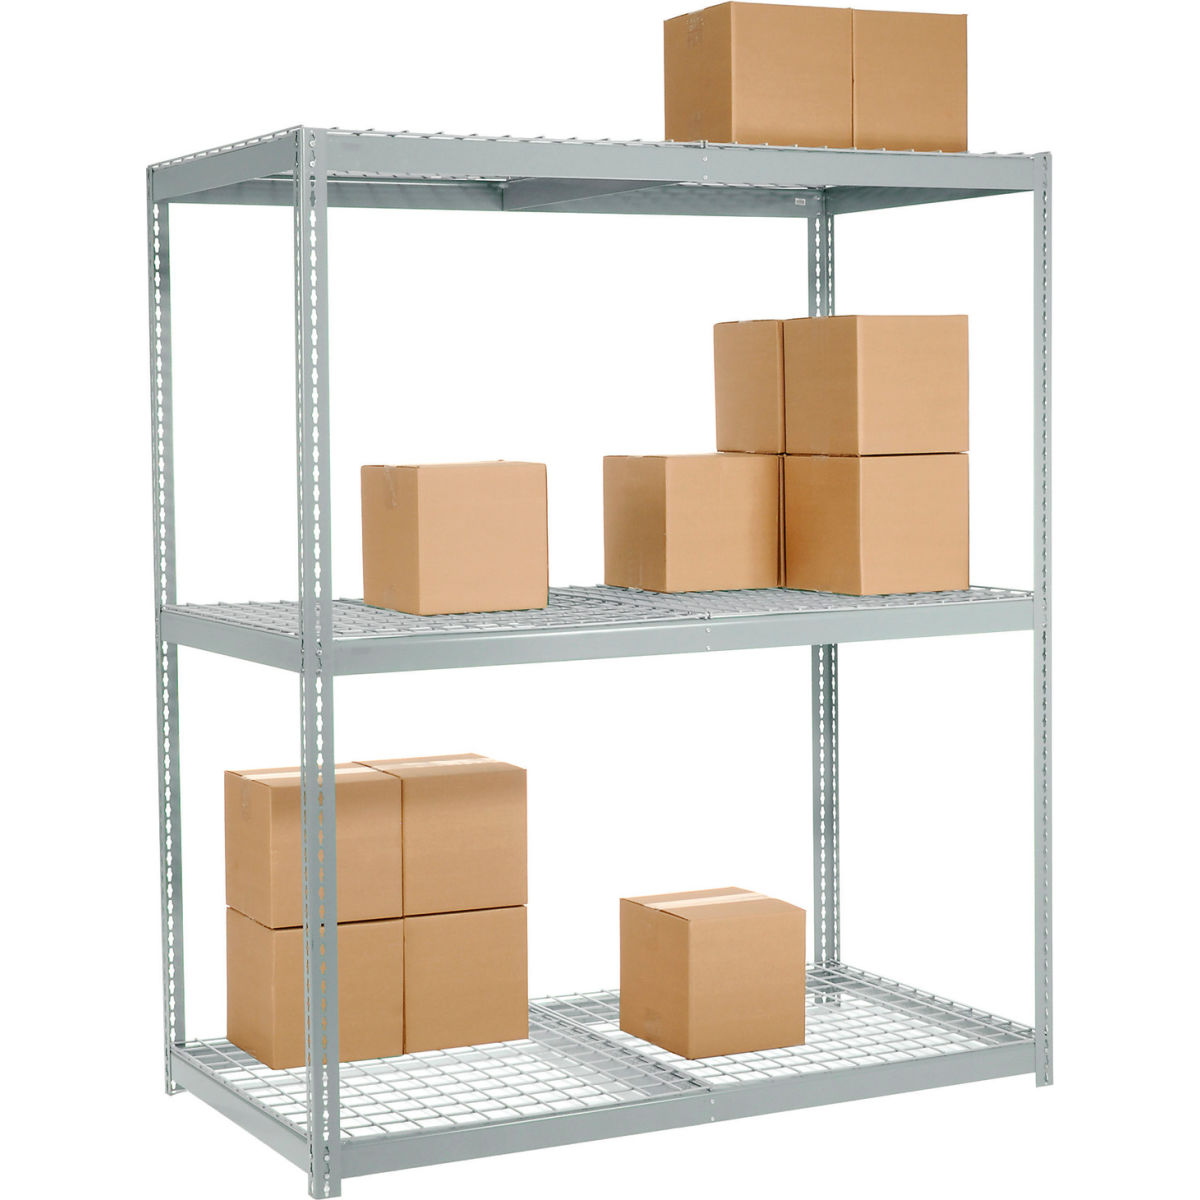 Picture of Global Industrial 502492 High Capacity Wire Deck Shelf - Gray - 72 x 24 in.